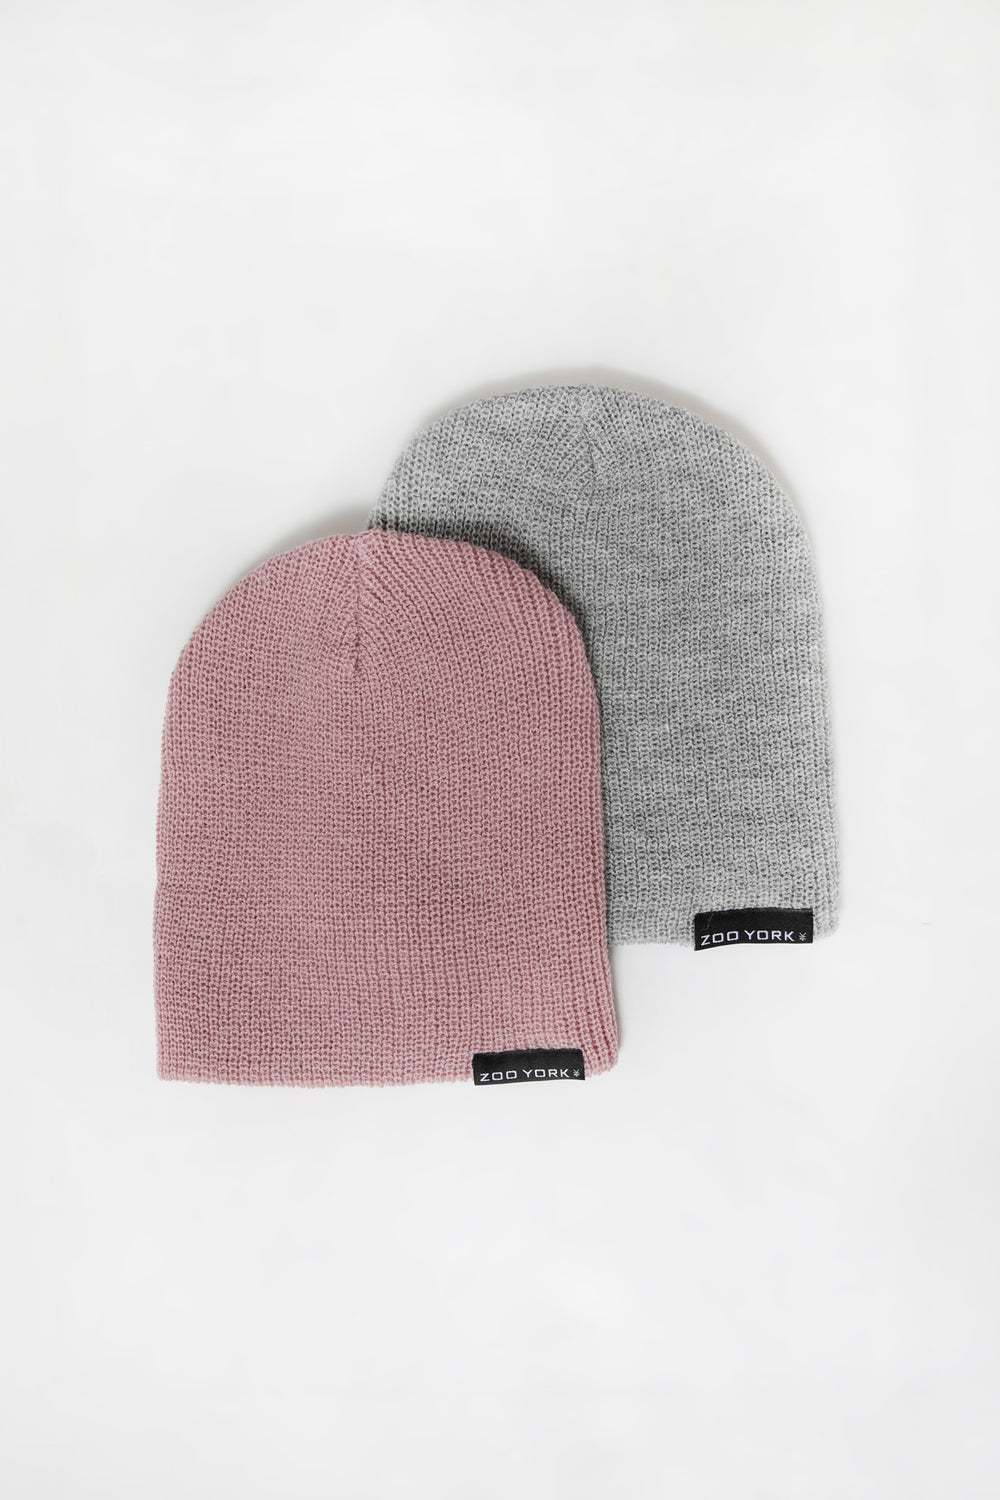 Zoo York Youth Slouch Beanie 2-Pack Pink